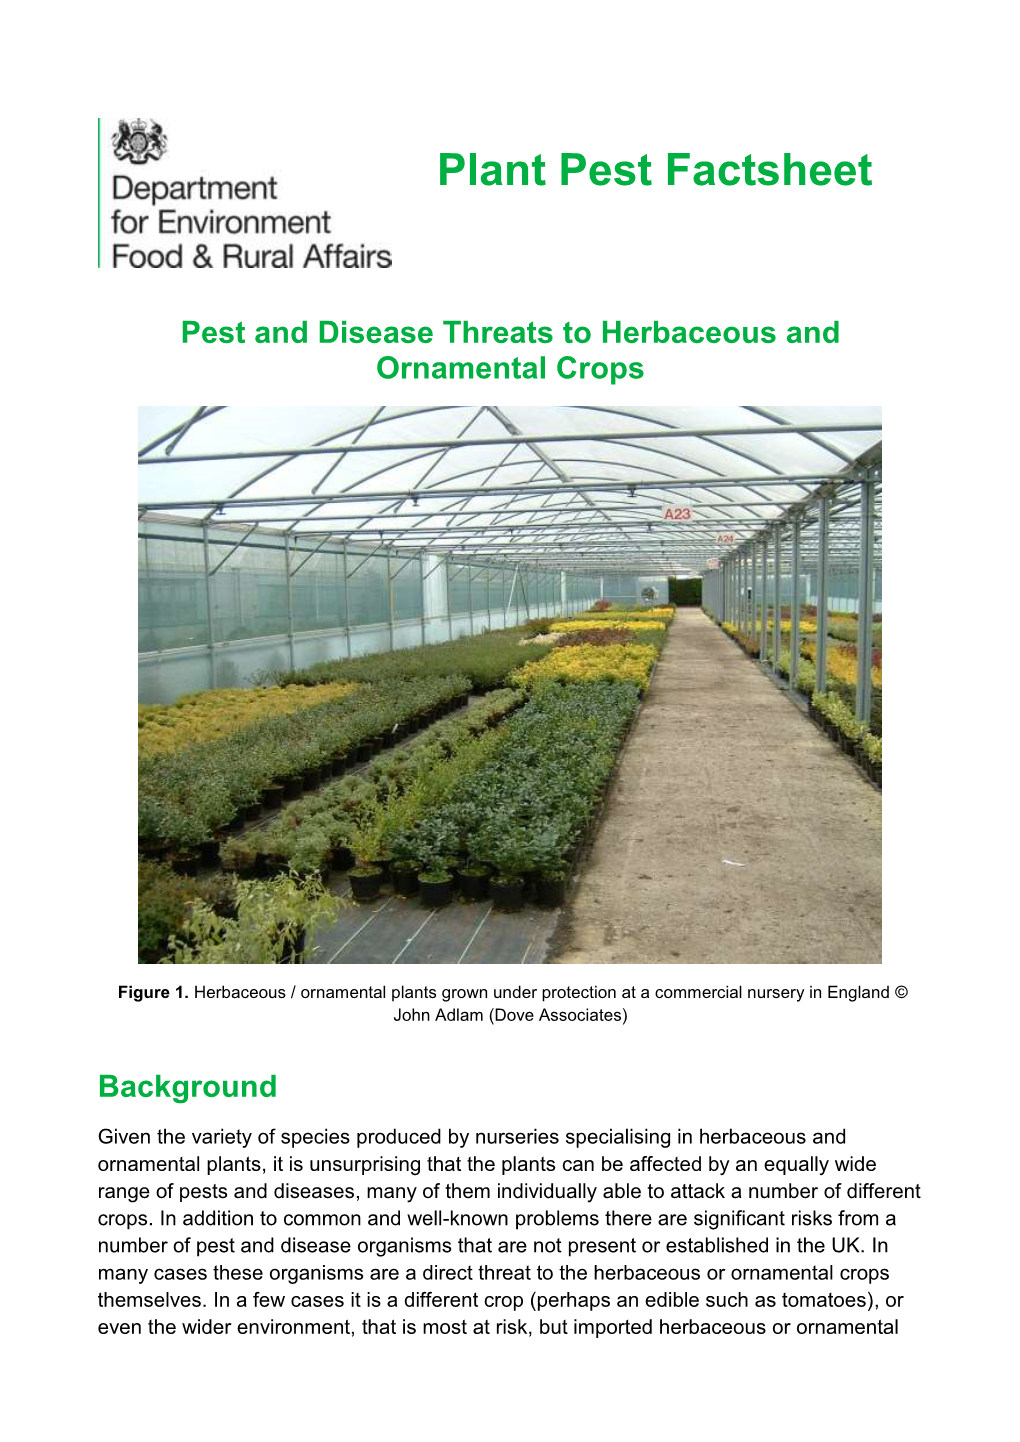 Pest and Disease Threats to Herbaceous and Ornamental Crops